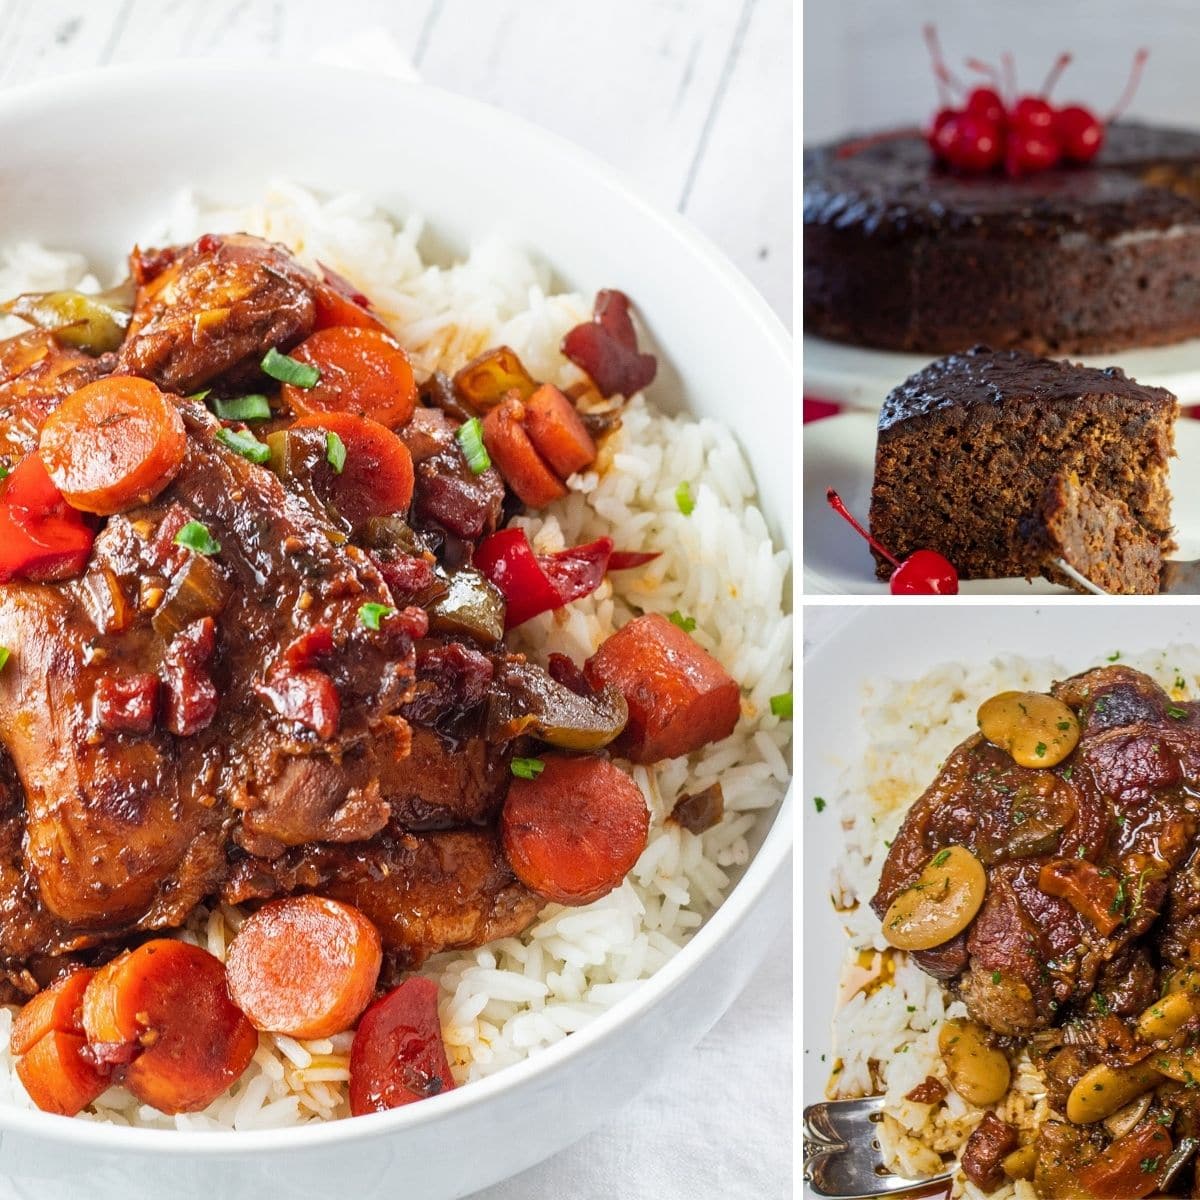 Best Jamaican recipes 3 photo collage of hearty entrees and dessert.